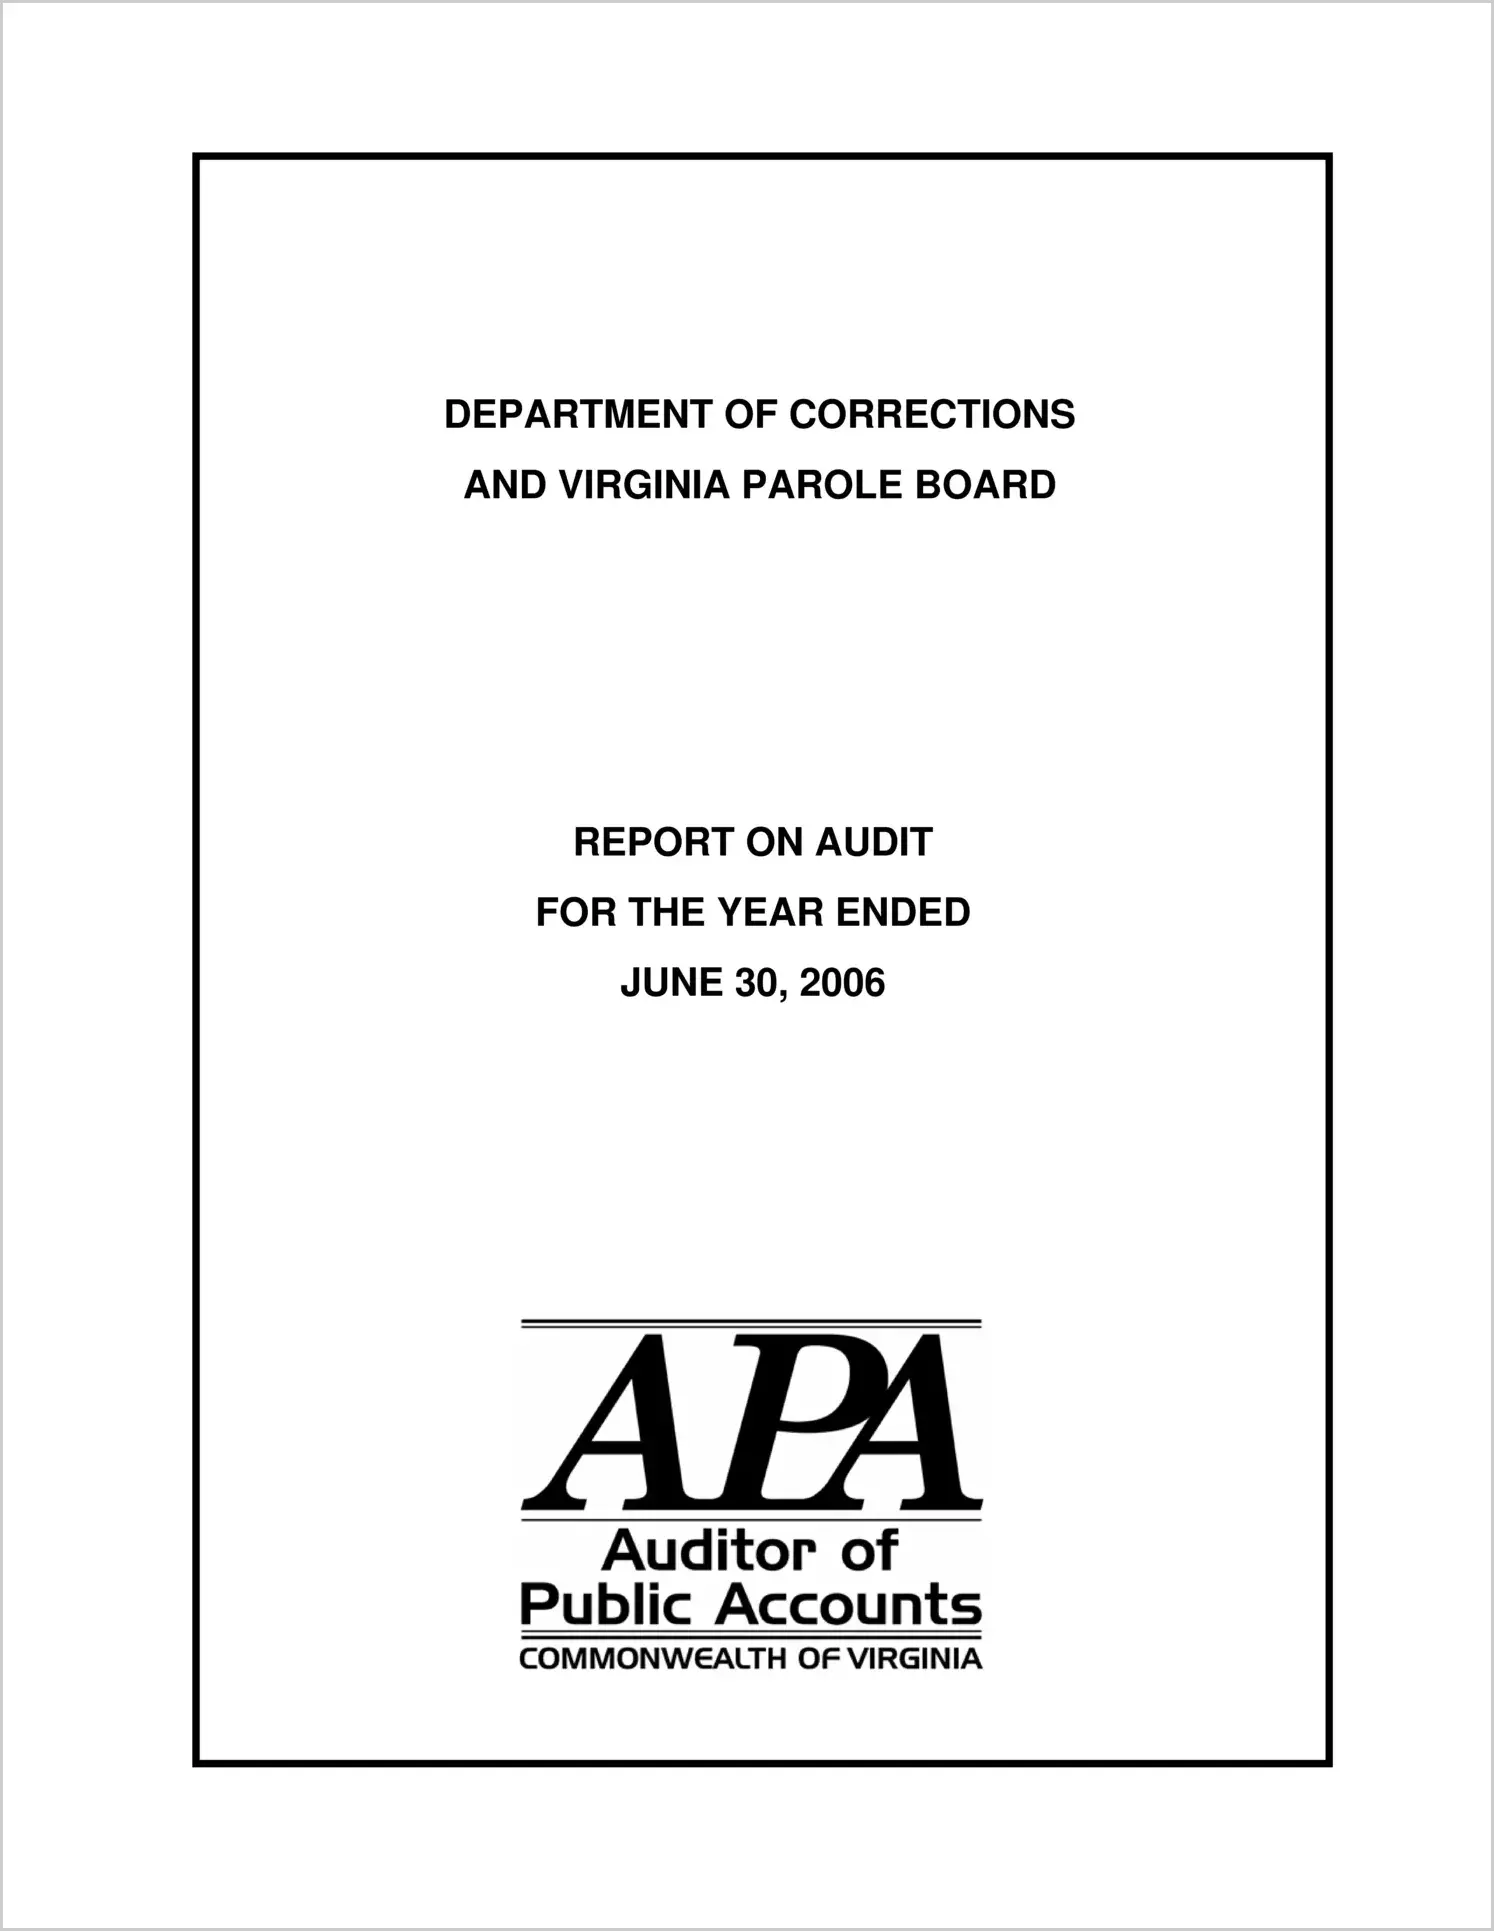 Department of Corrections and Virginia Parole Board for the year ended June 30, 2006